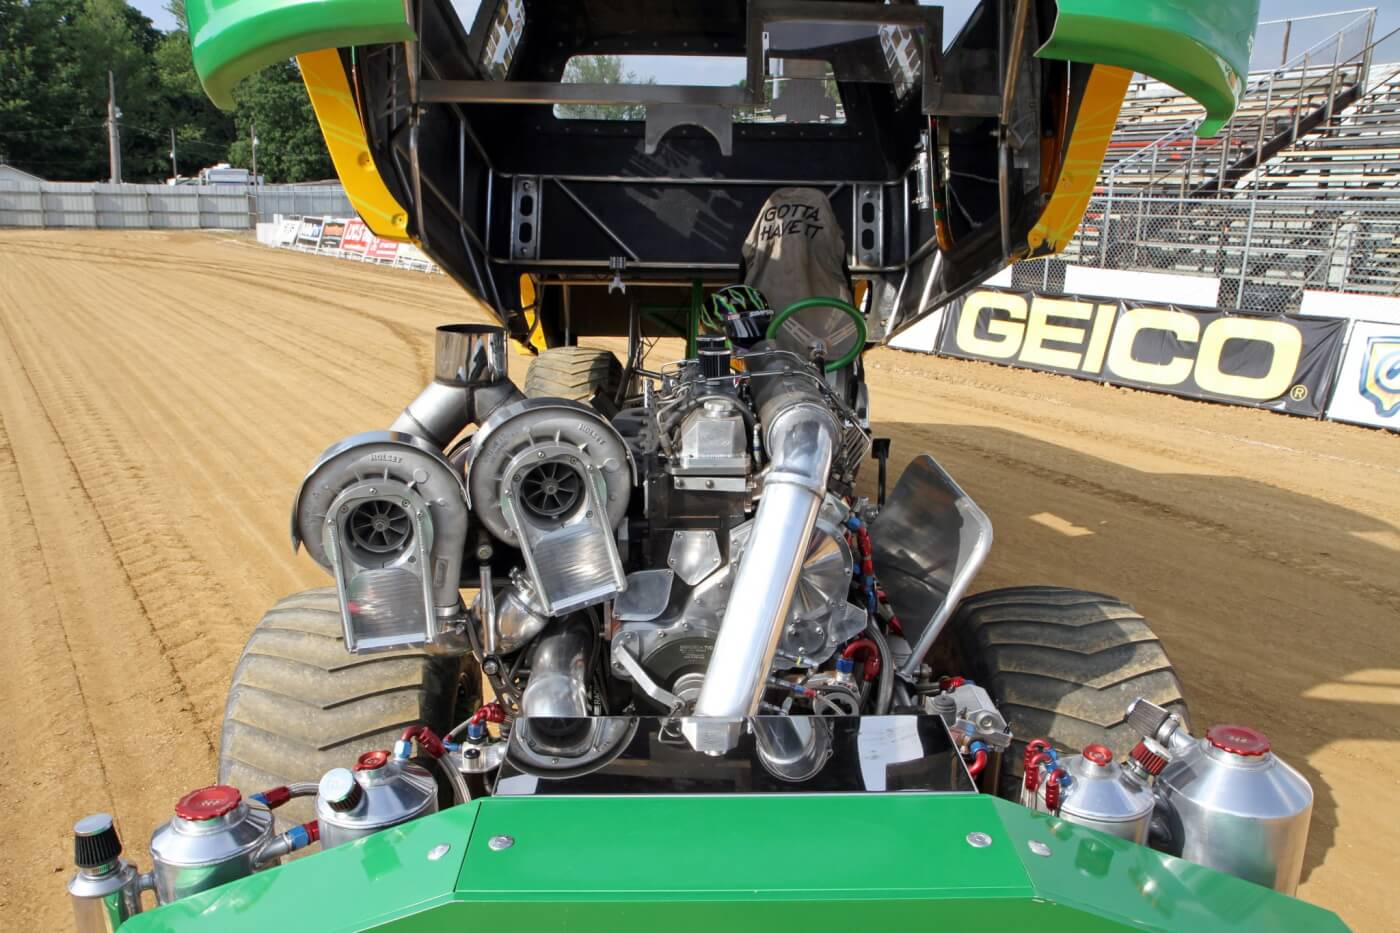 Kind of like staring down a double barrel shotgun, looking at the parallel Columbus Diesel Supply Pro-Stock series twins on this engine can be intimidating.